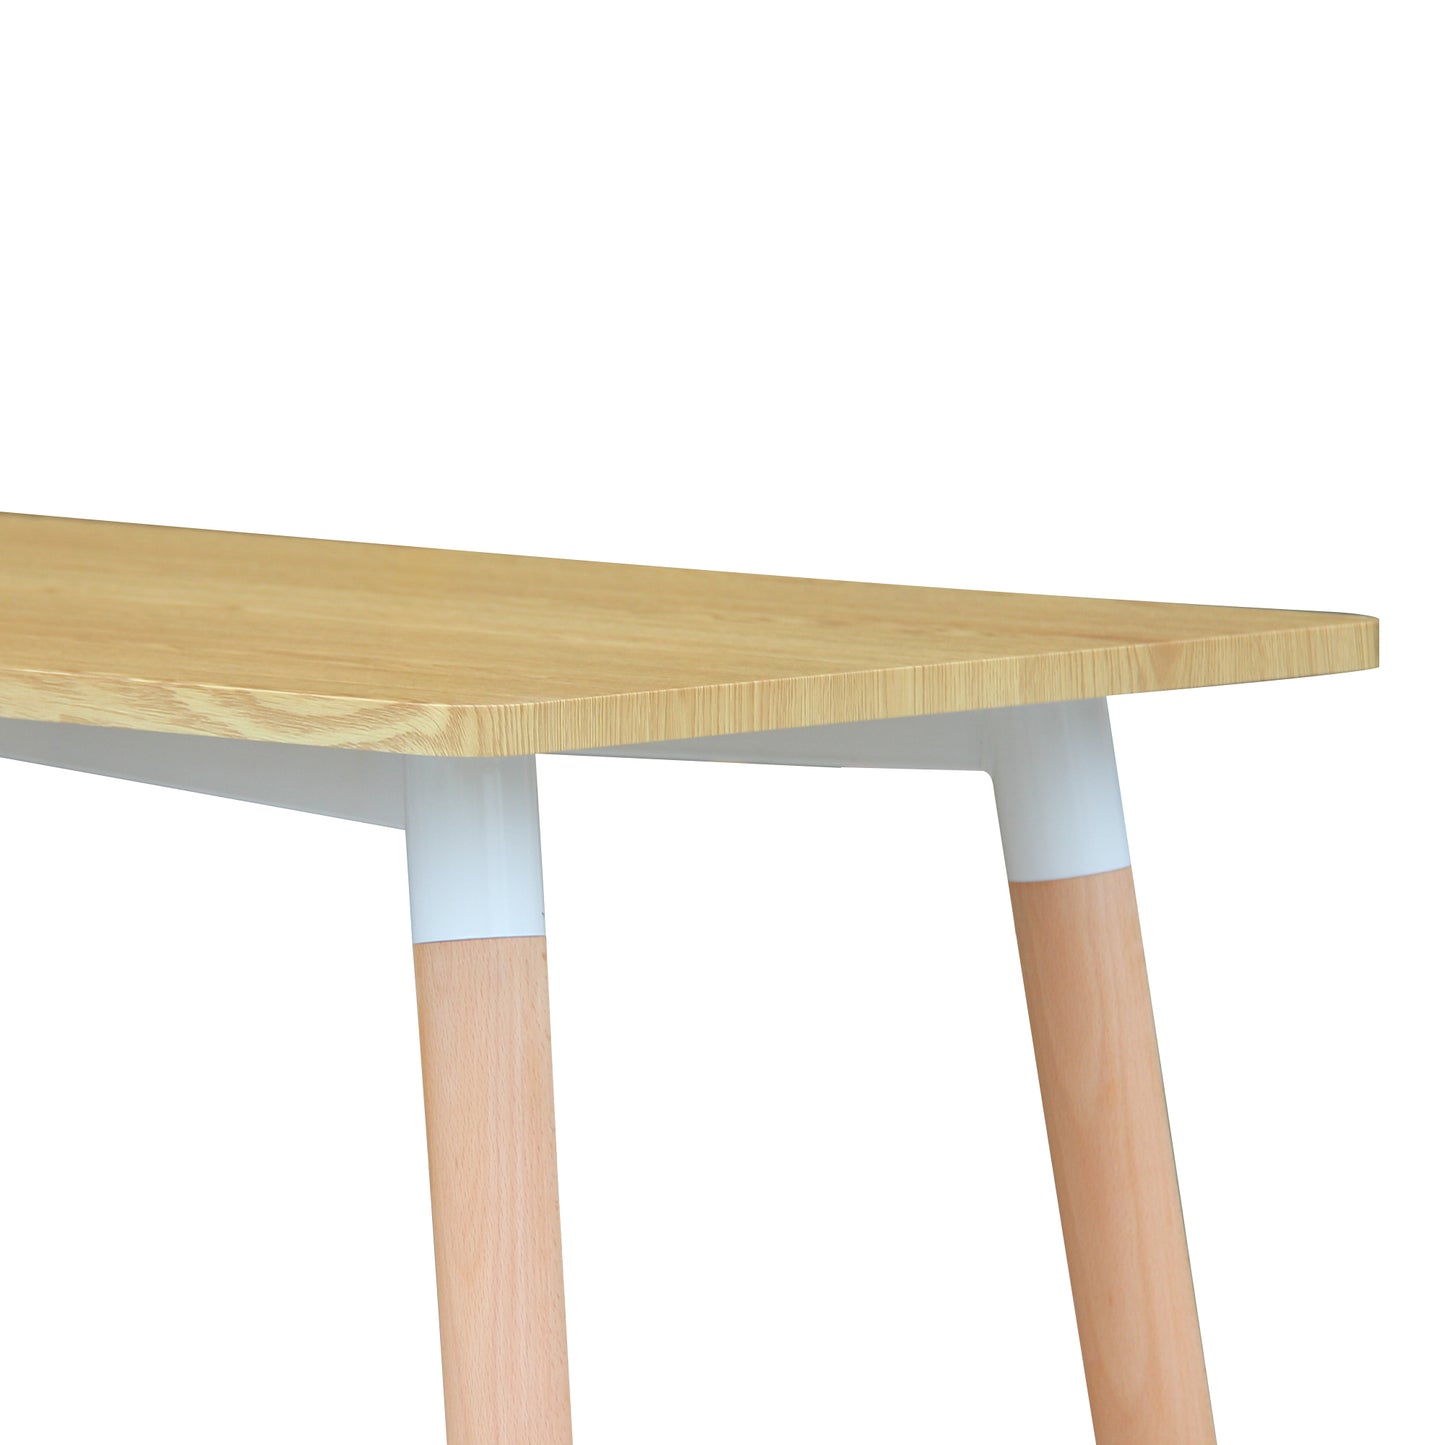 CHOTTO - Hako Rectangle Top Dining Table with Wooden Legs - Wood - 120cm